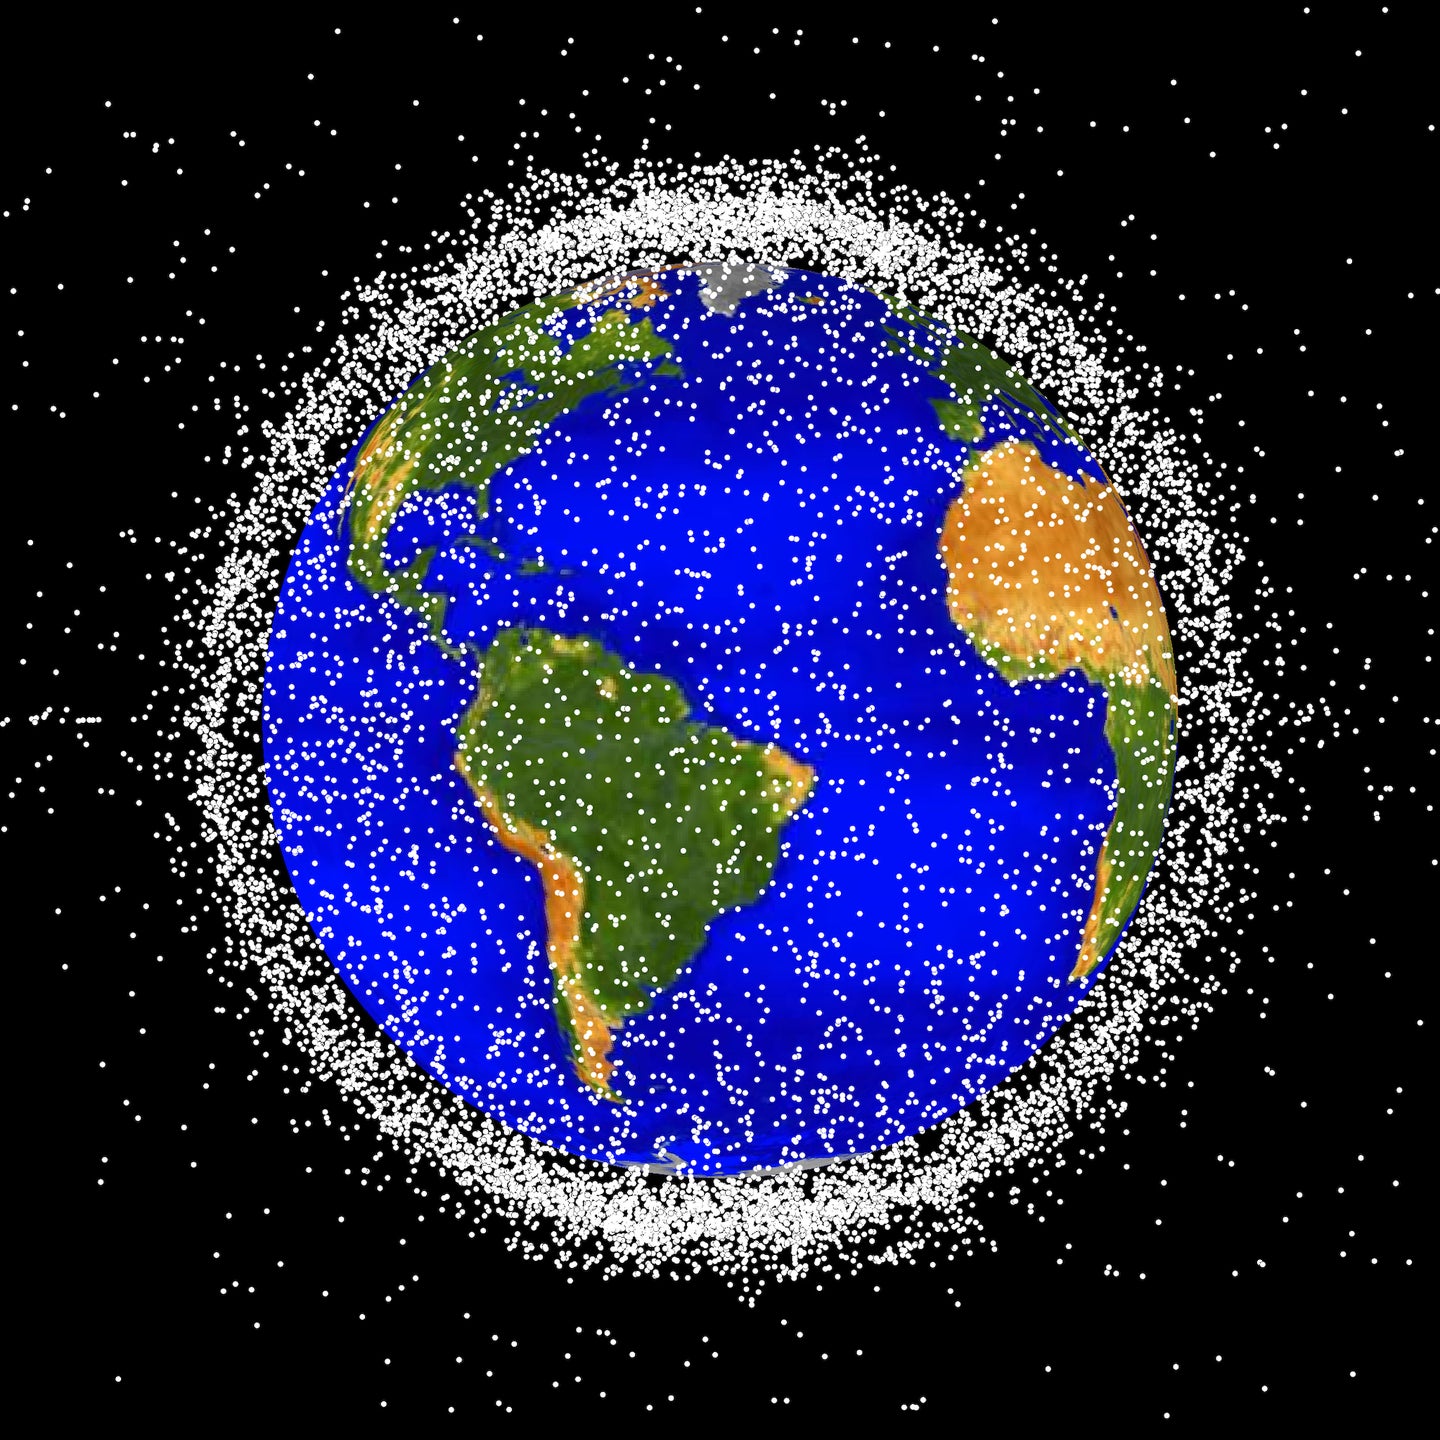 Most space debris is concentrated in a low-Earth orbit. 